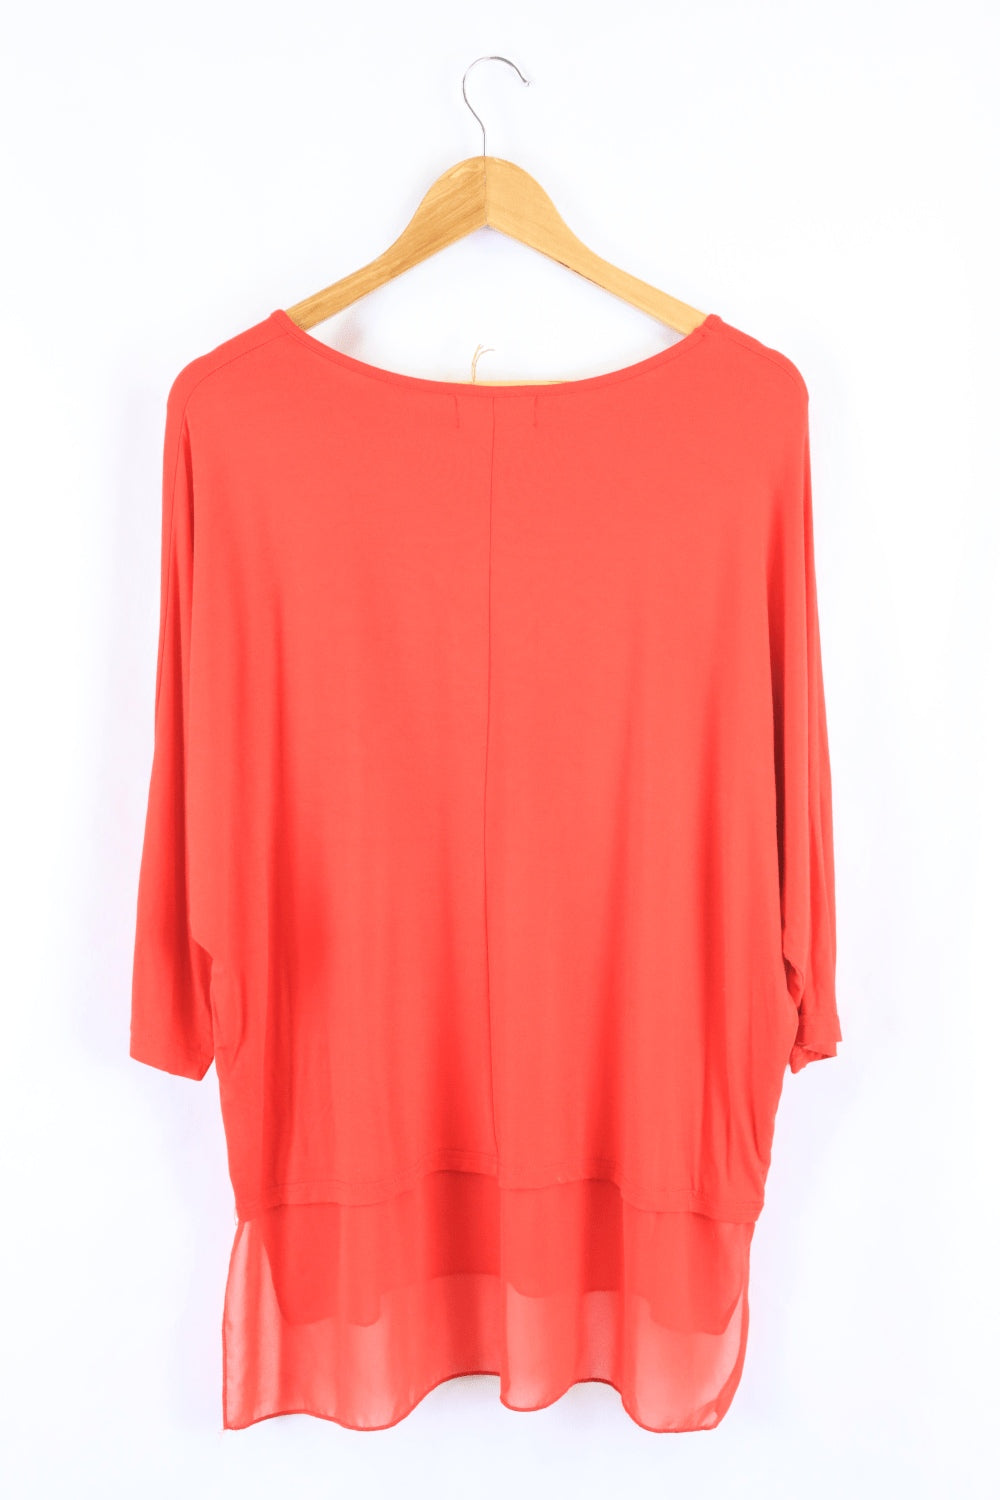 Bamboo By Whispers Red Long Sleeve L